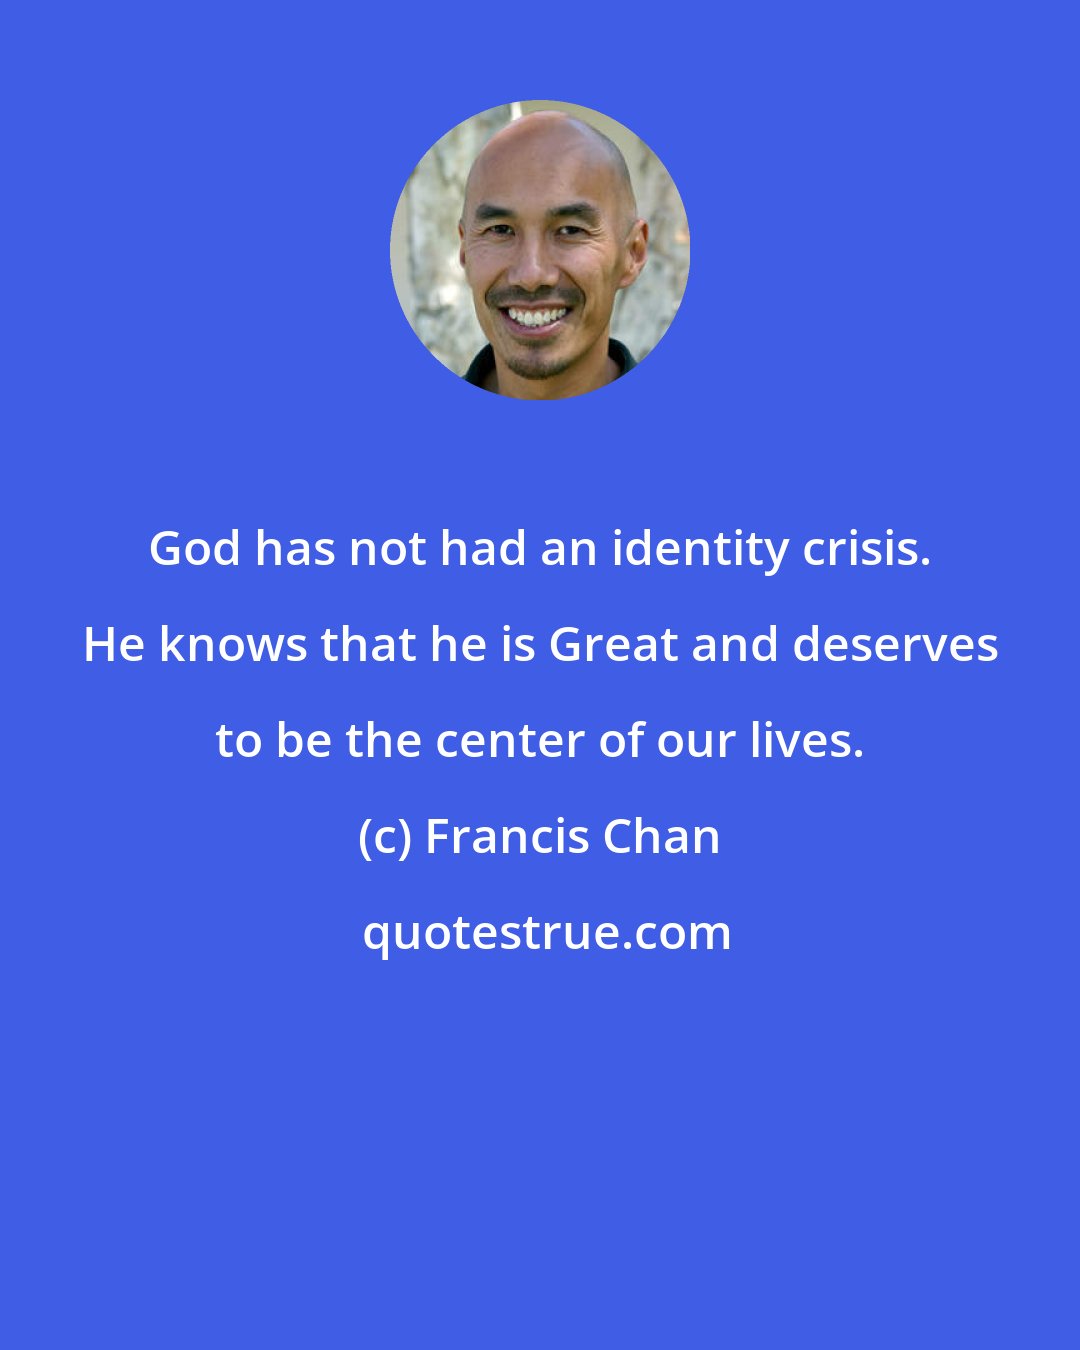 Francis Chan: God has not had an identity crisis. He knows that he is Great and deserves to be the center of our lives.